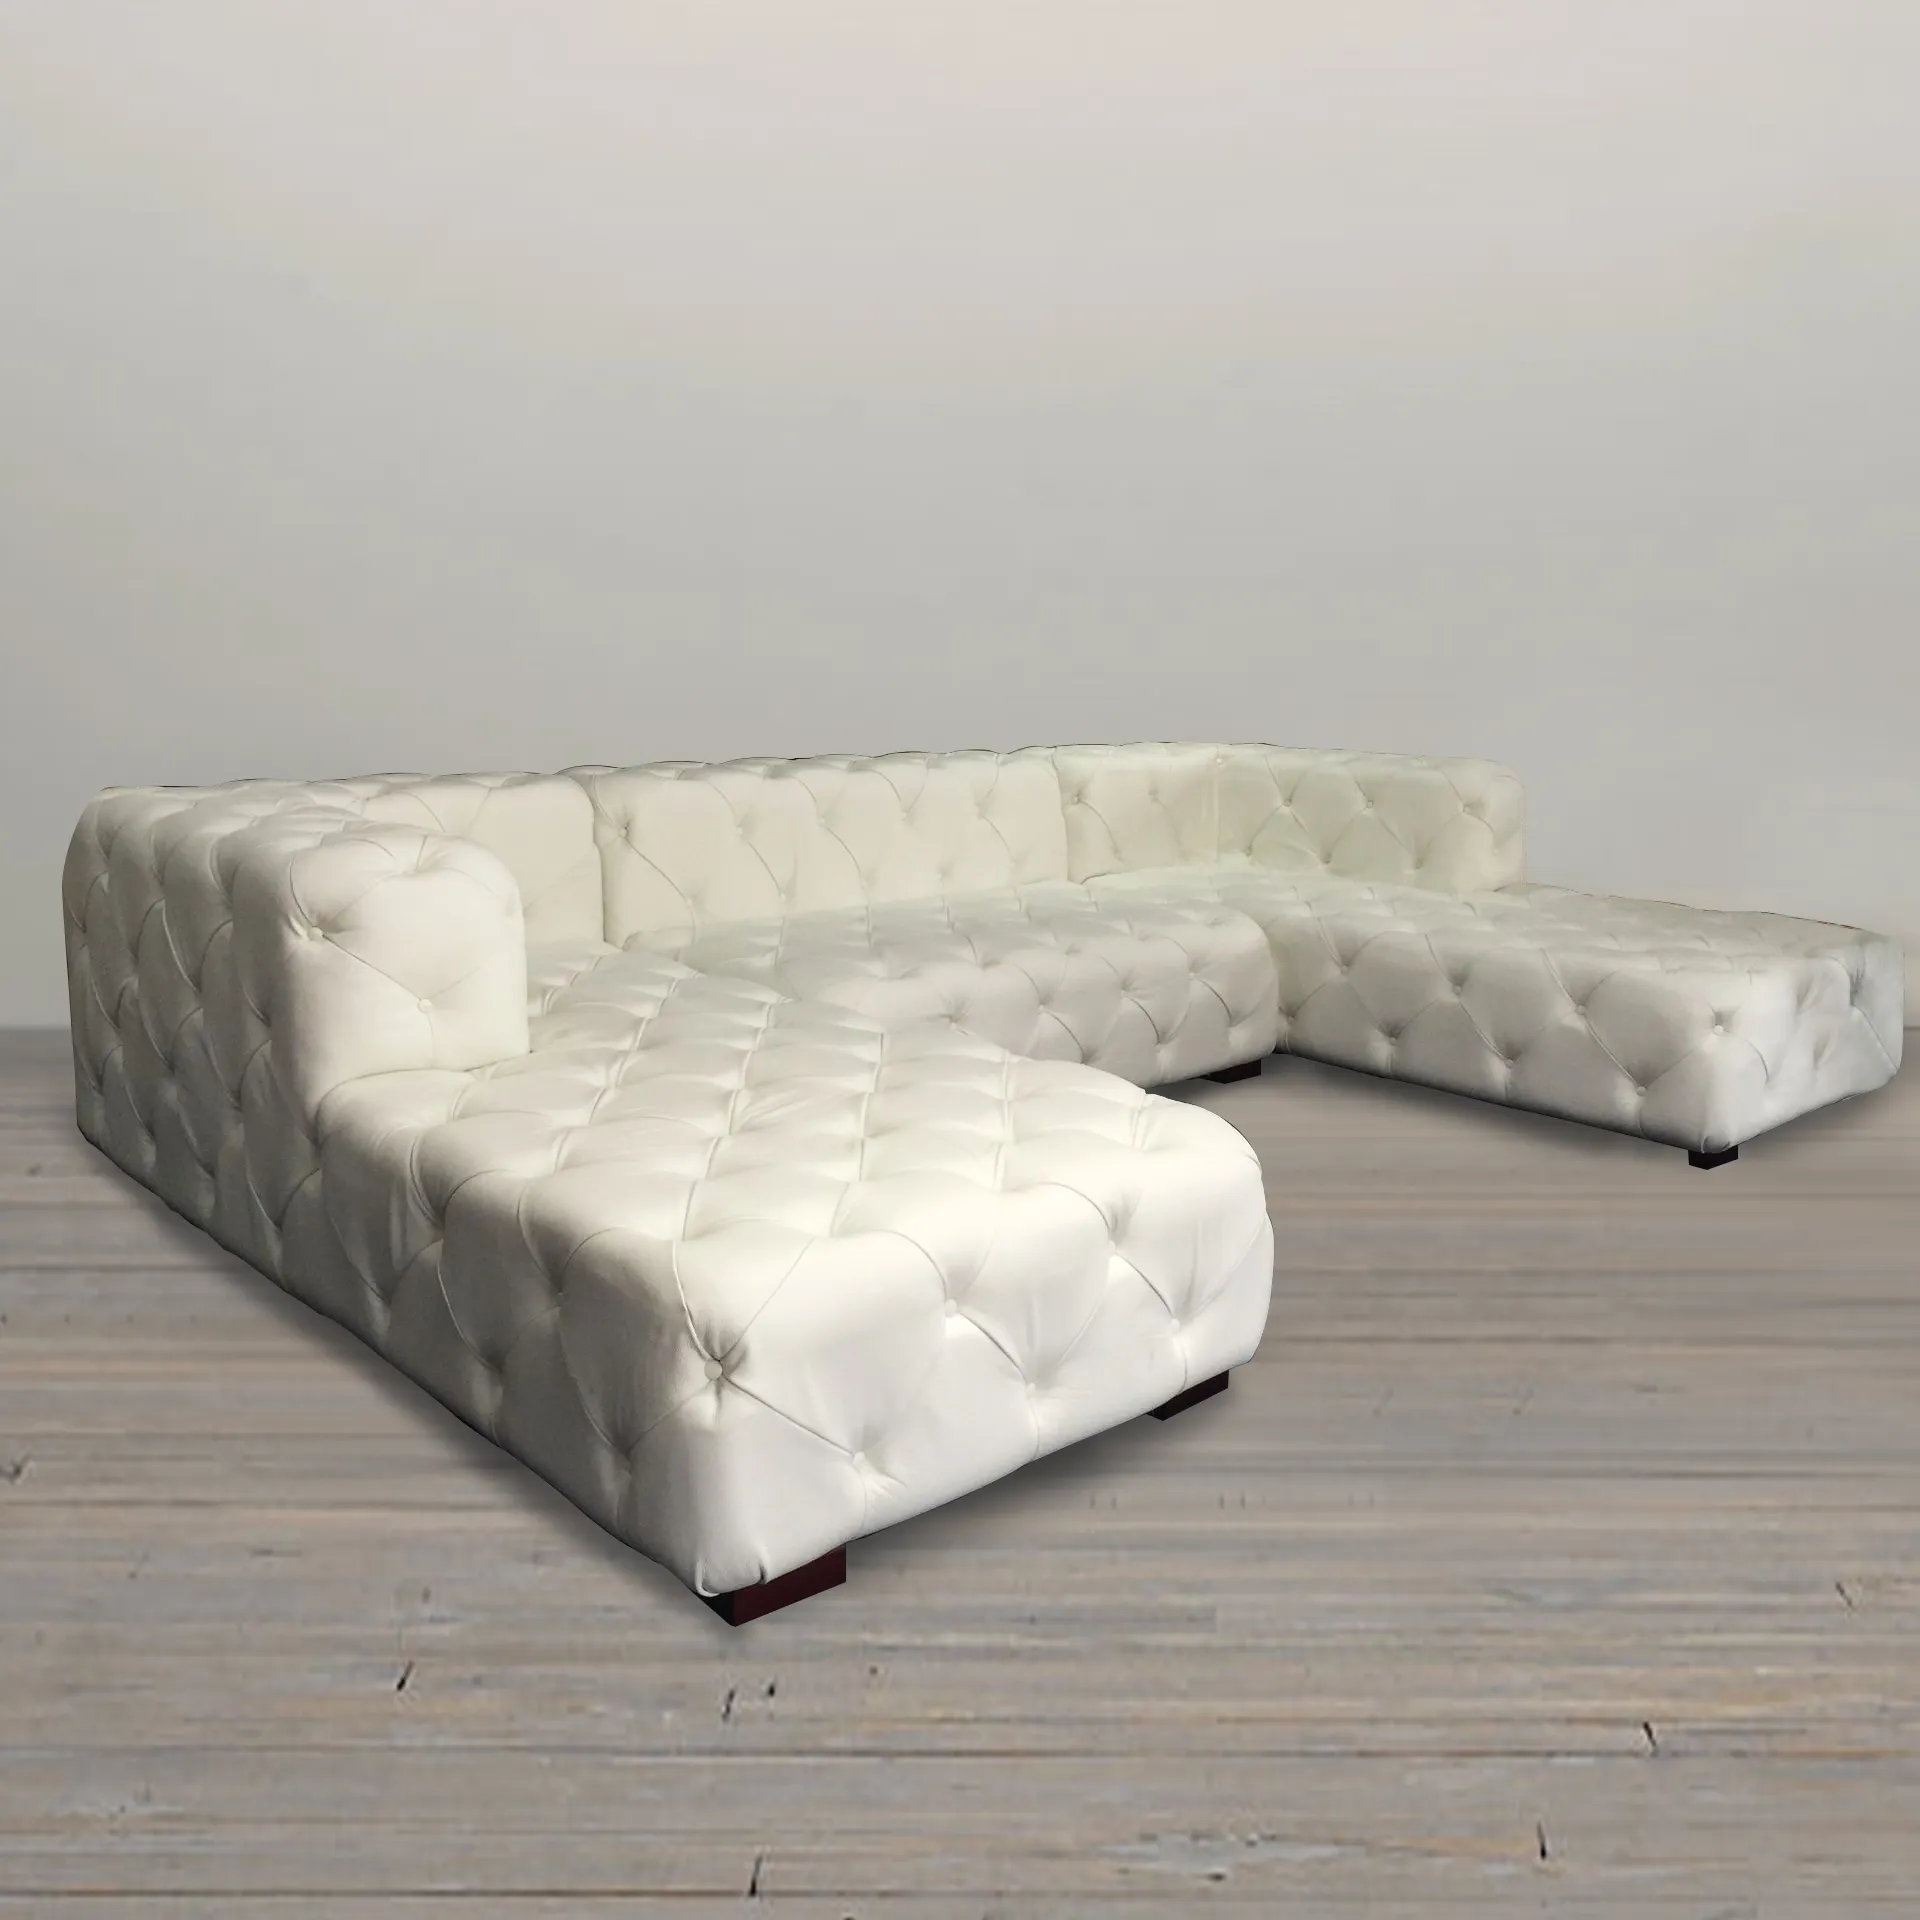 Retro Button Tufted White Genuine Leather Sofa/ U-Shaped Classic Chesterfield Couch Sofa/ American Hot-Sale Living Room Sofa